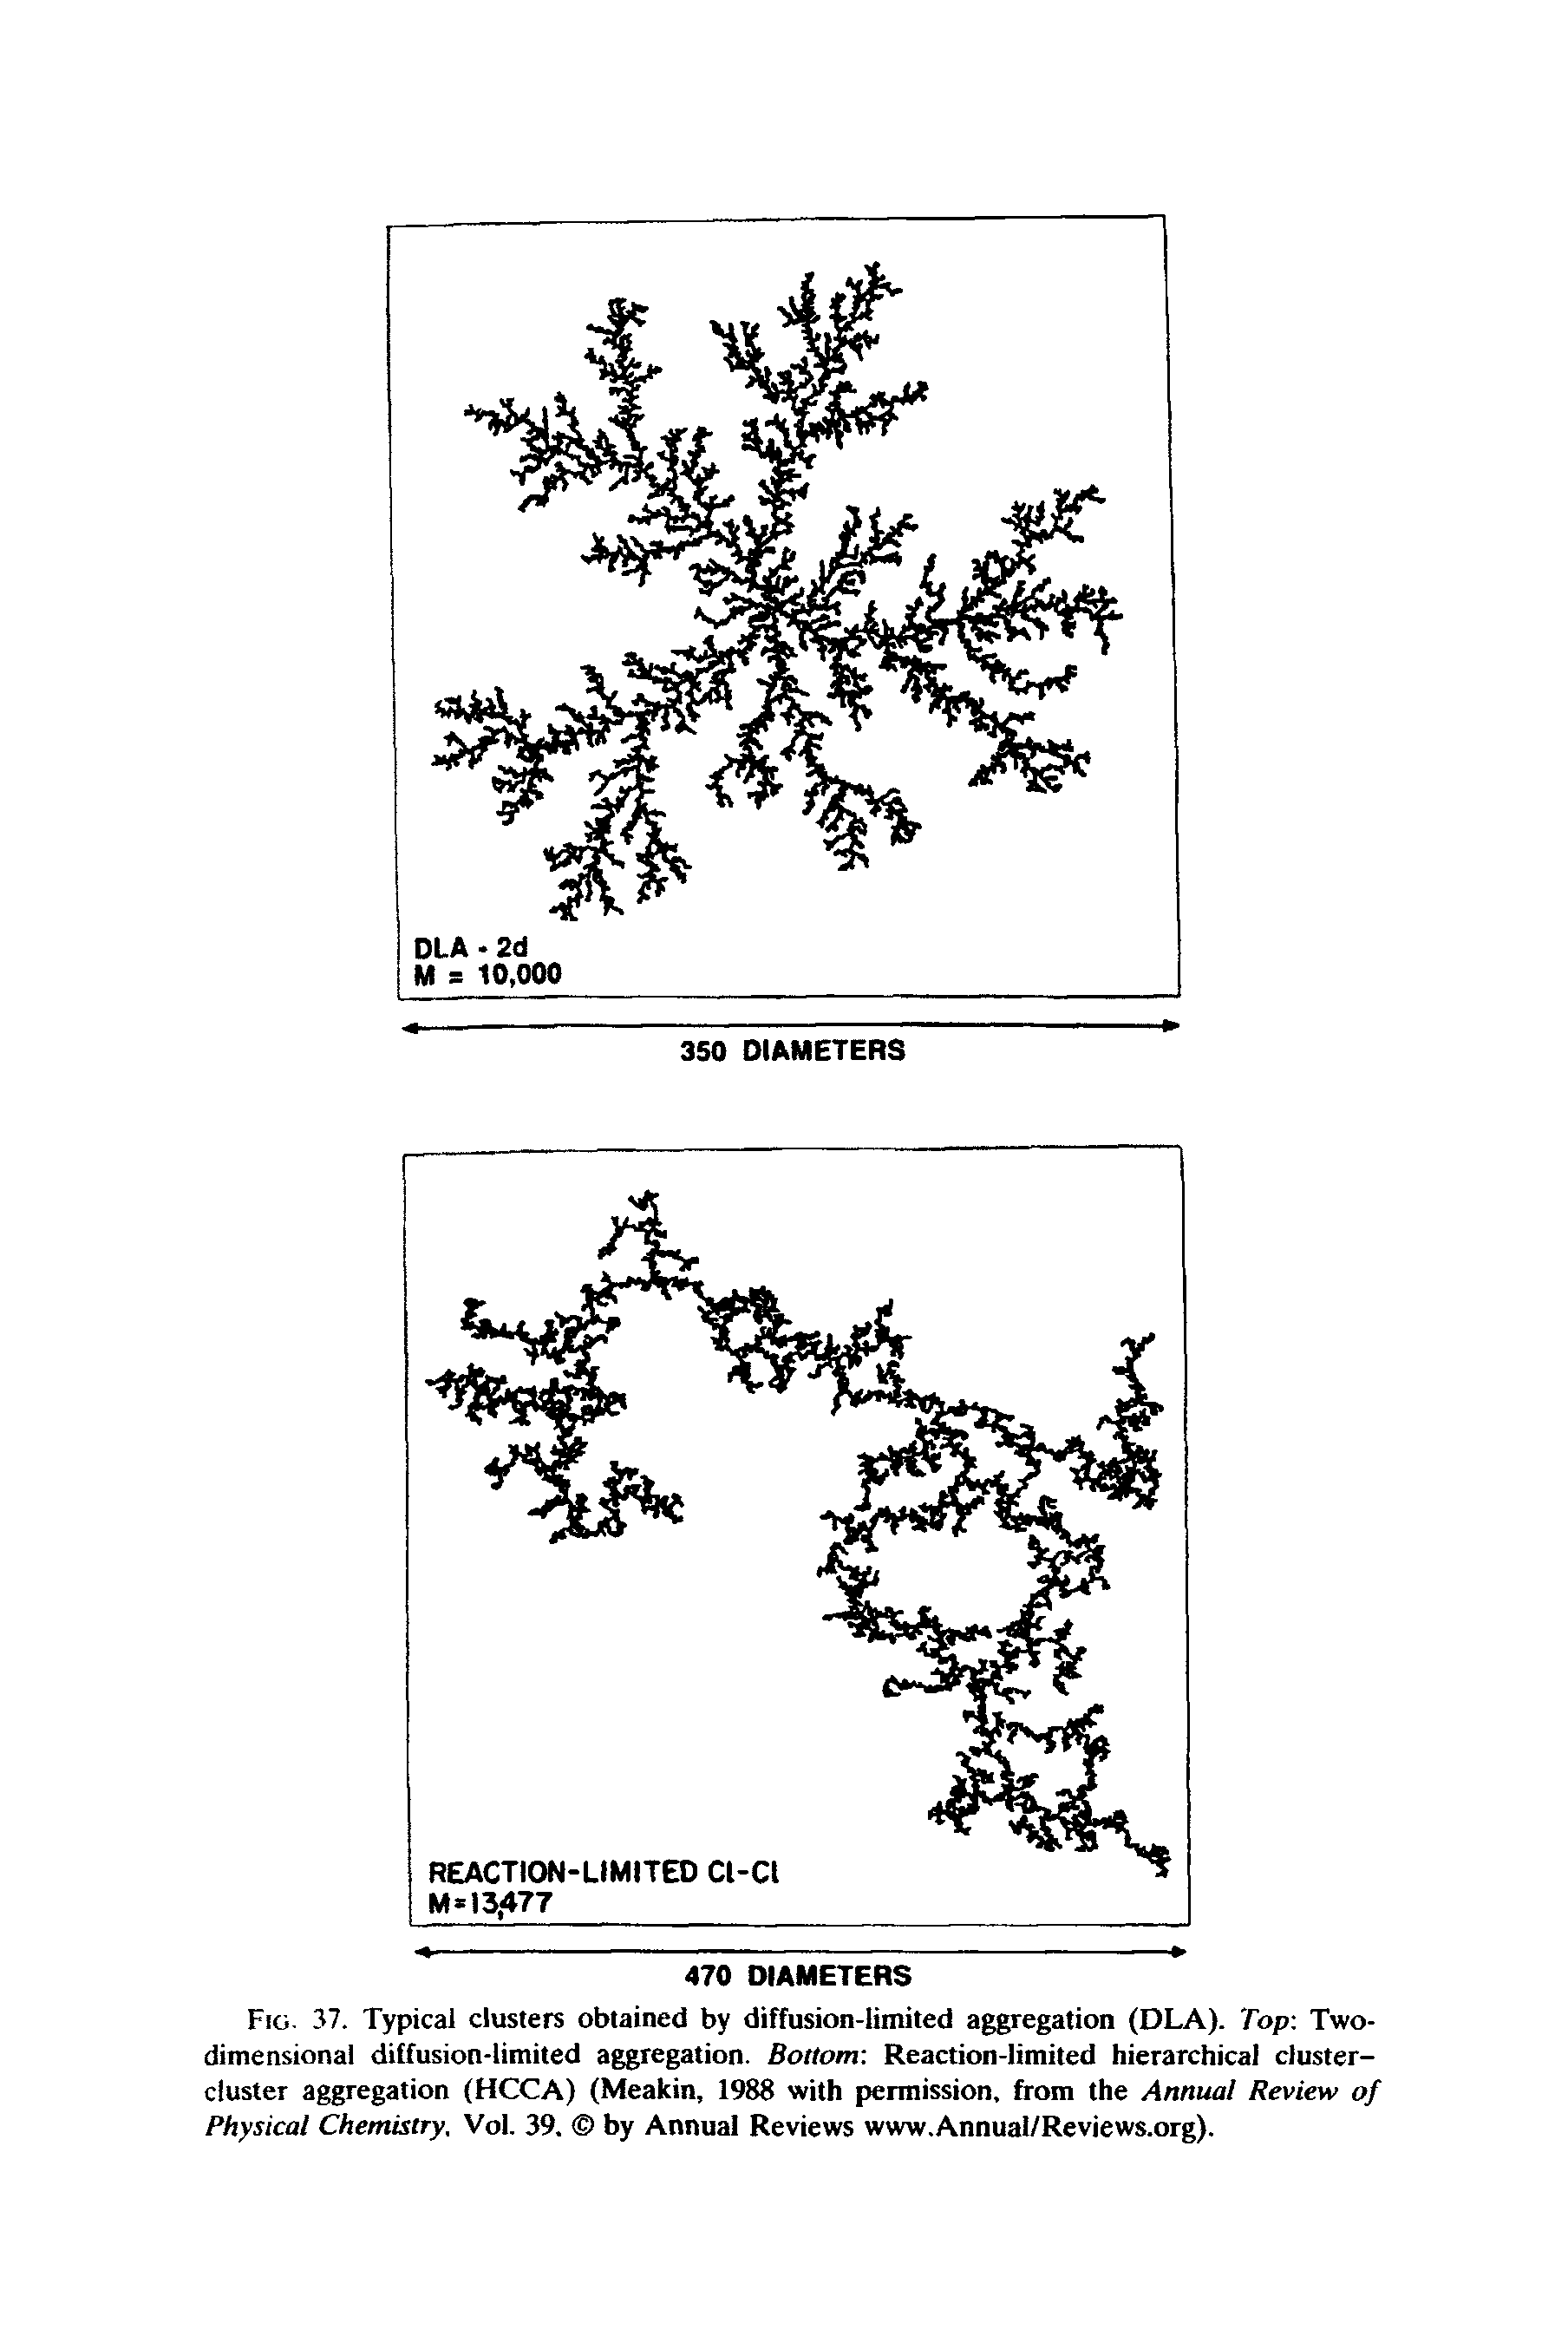 Fig. 37. Typical clusters obtained by diffusion-limited aggregation (DLA). Top Two-dimensional diffusion-limited aggregation. Bottom Reaction-limited hierarchical cluster-cluster aggregation (HCCA) (Meakin, 1988 with permission, from the Annual Review of Physical Chemistry, Vol. 39. by Annual Reviews www.Annual/Reviews.org).